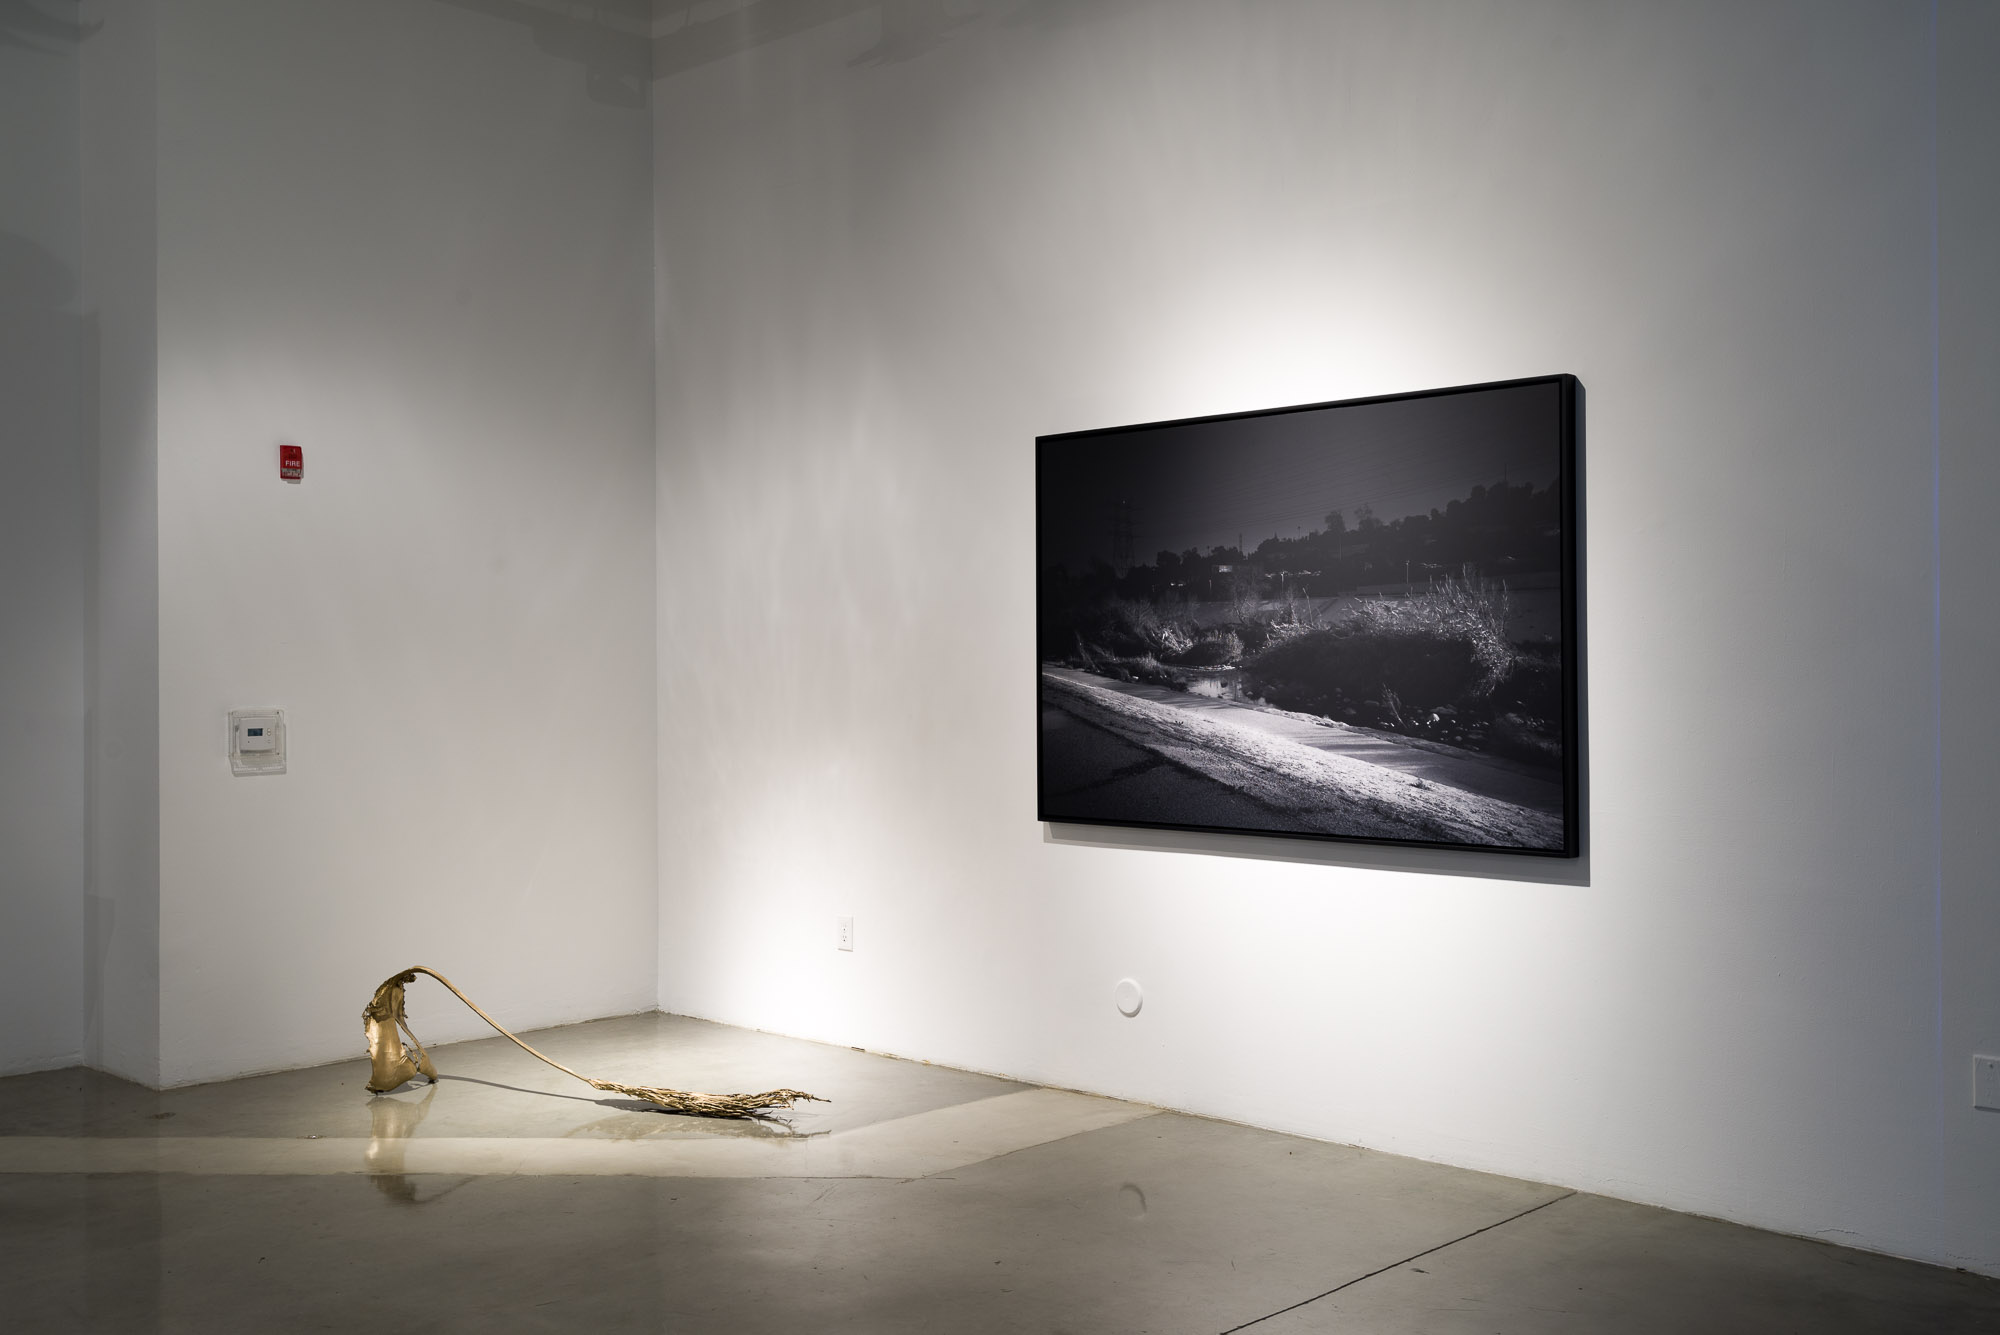 Installation view, Staging Los Angeles: Reality, Fantasy, and the Space Between, USC Roski School of Art and Design, Los Angeles, CA, November 2015